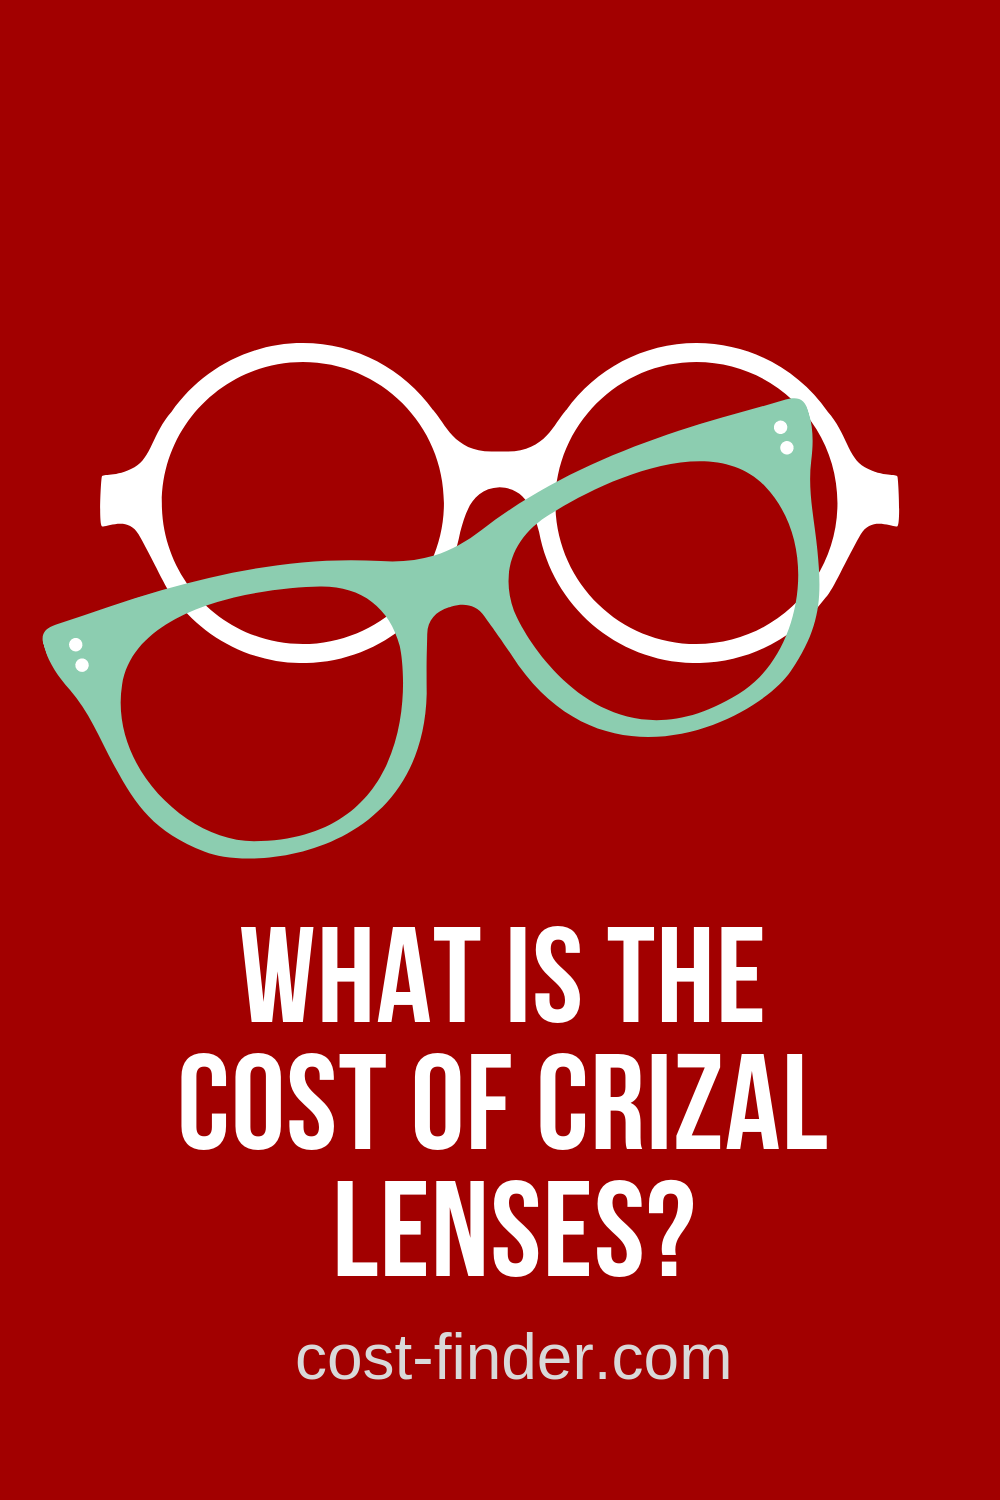 What is the Cost of Crizal Lenses? Lenses. Eyeglass